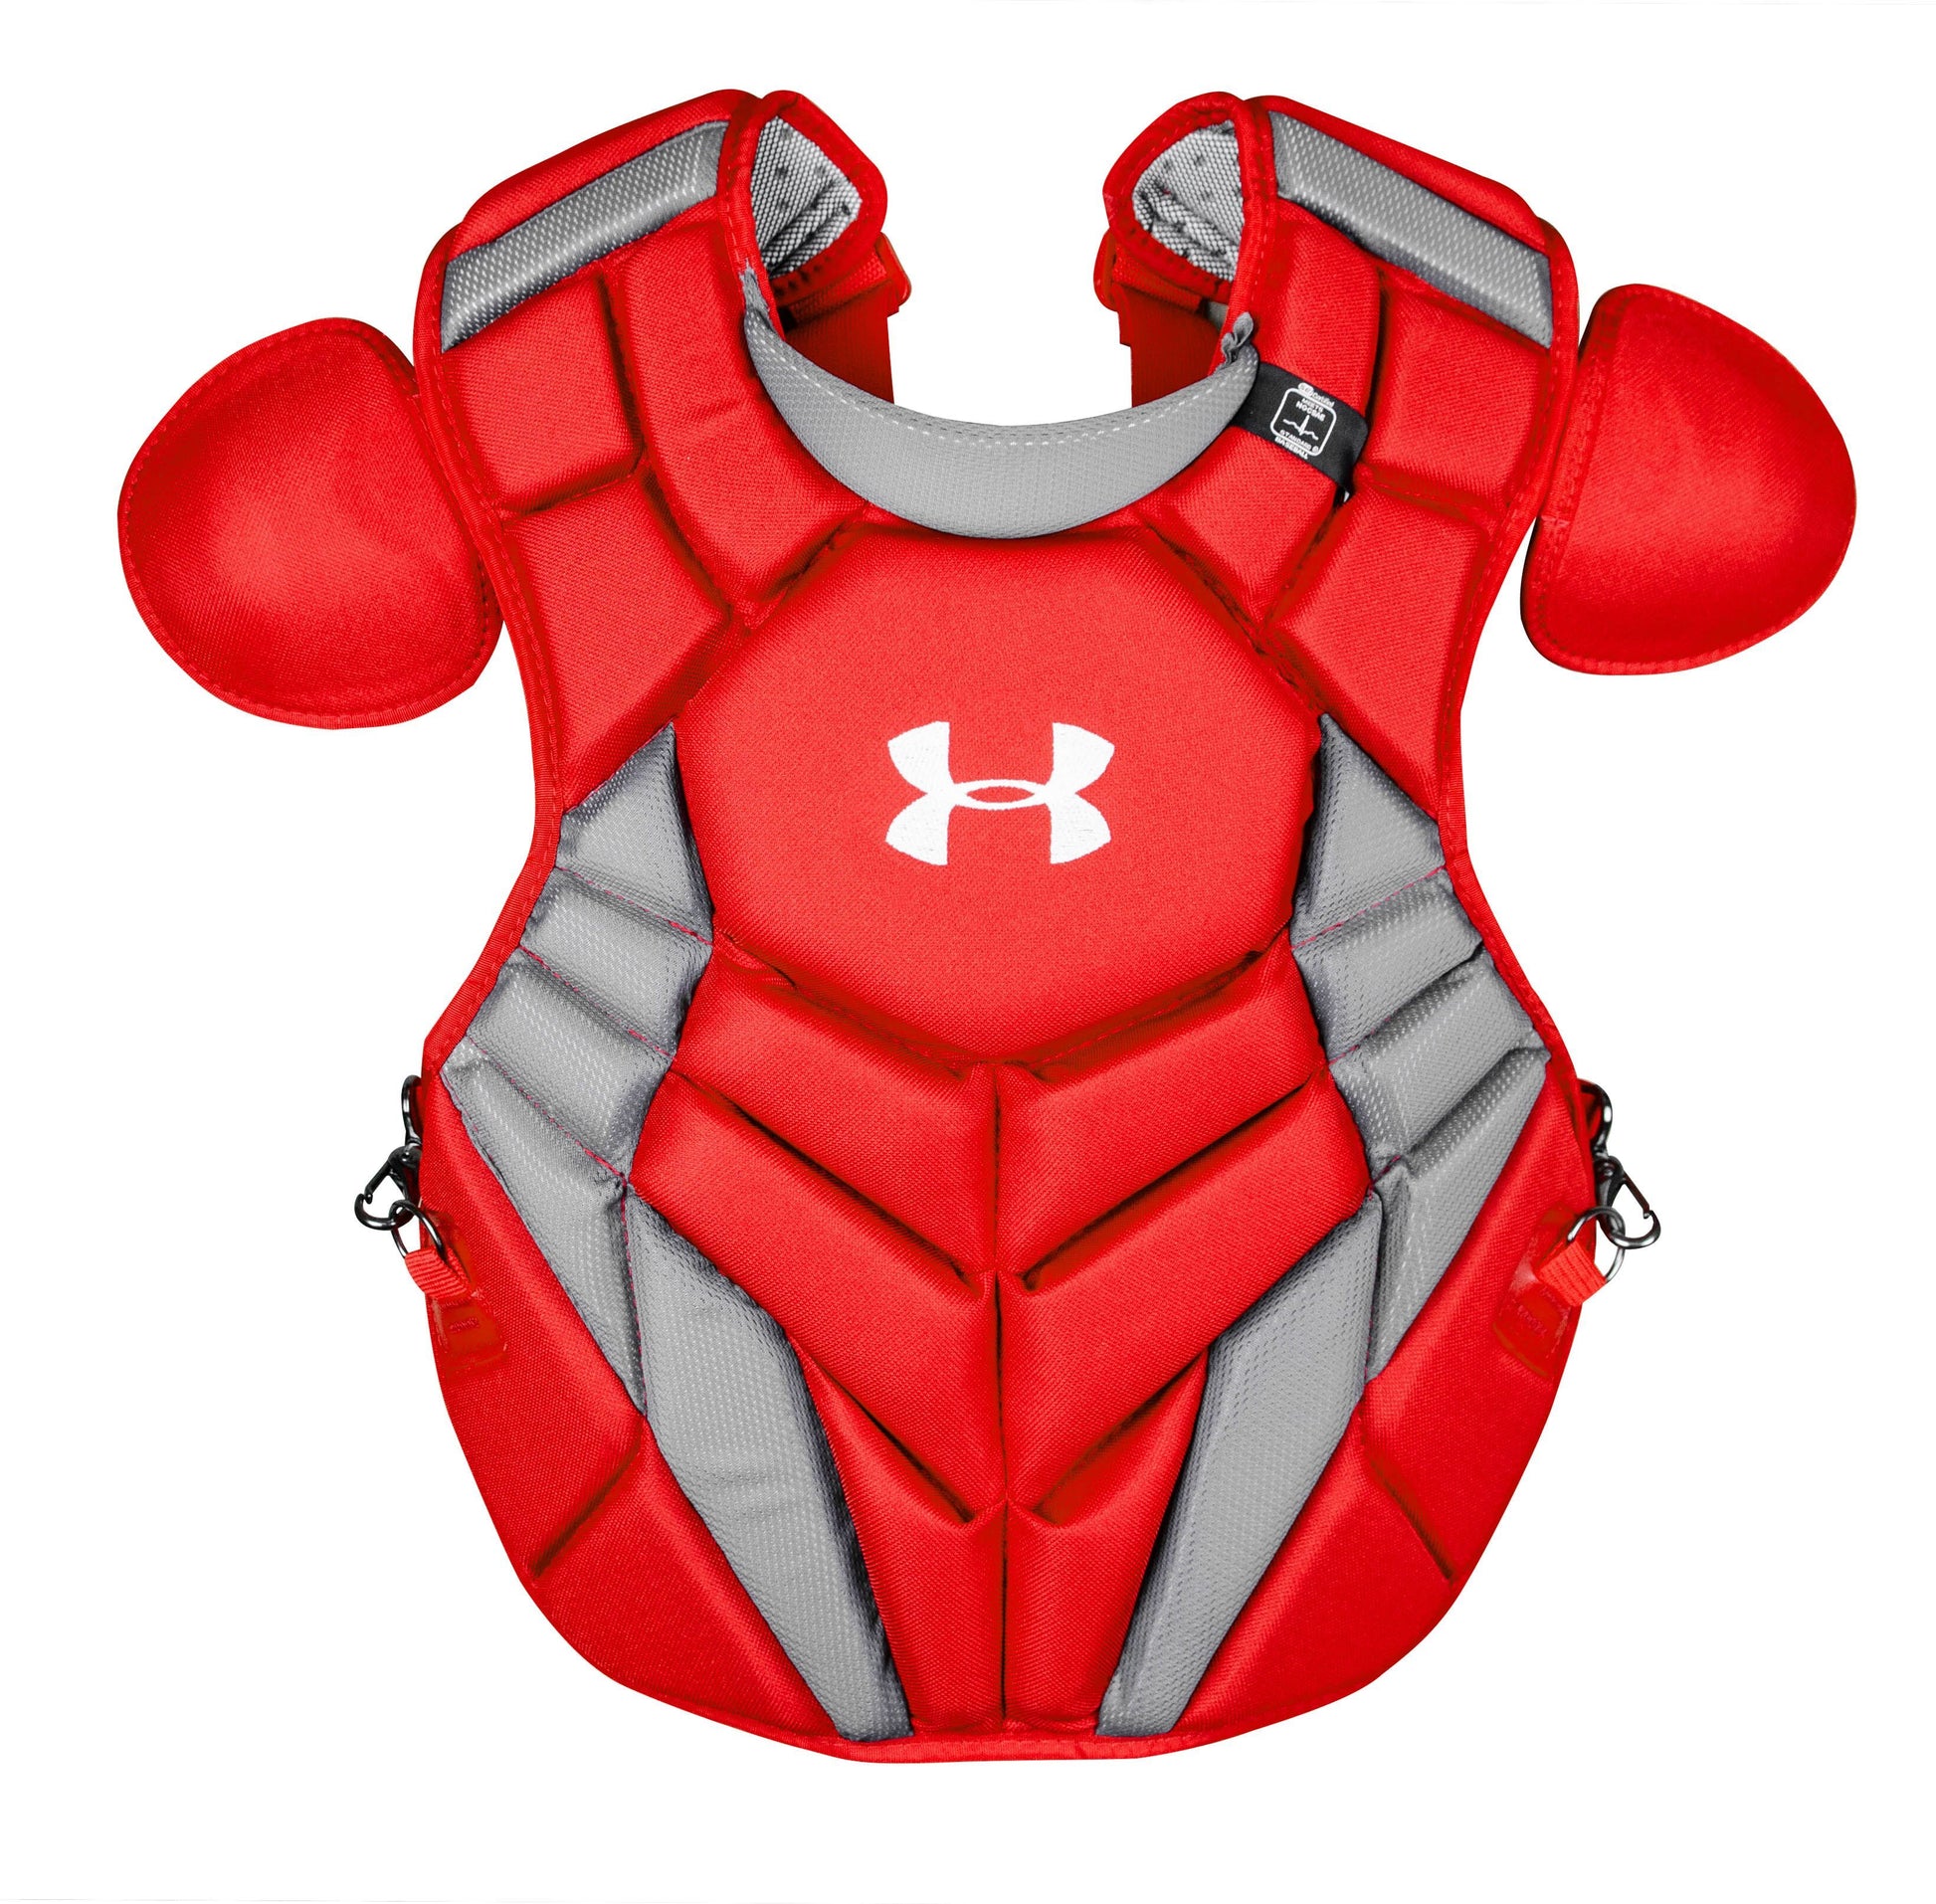 Under Armour Pro 4 Youth Chest Protector UACPCC4-JRP